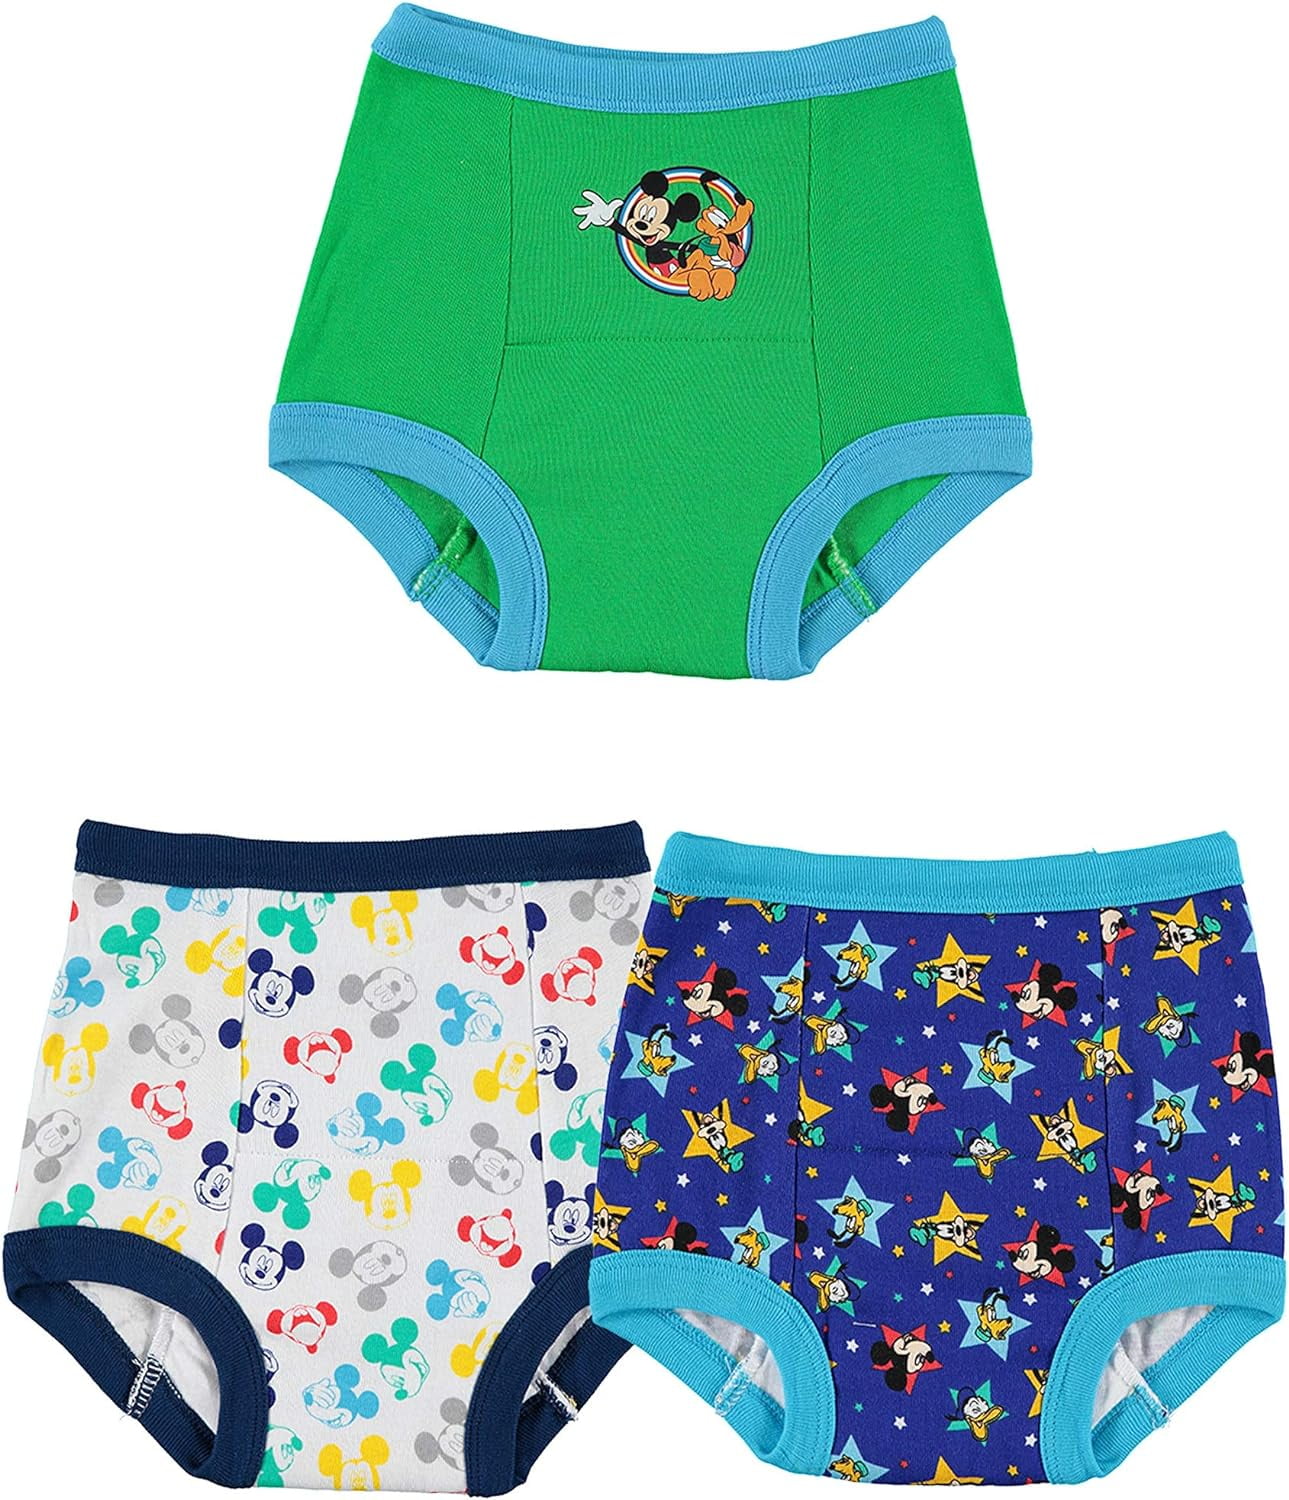 Disney boys Mickey Mouse Potty Training Pants and Starter Kit With Stickers  & Tracking Chart 2 3-pack Training Pant